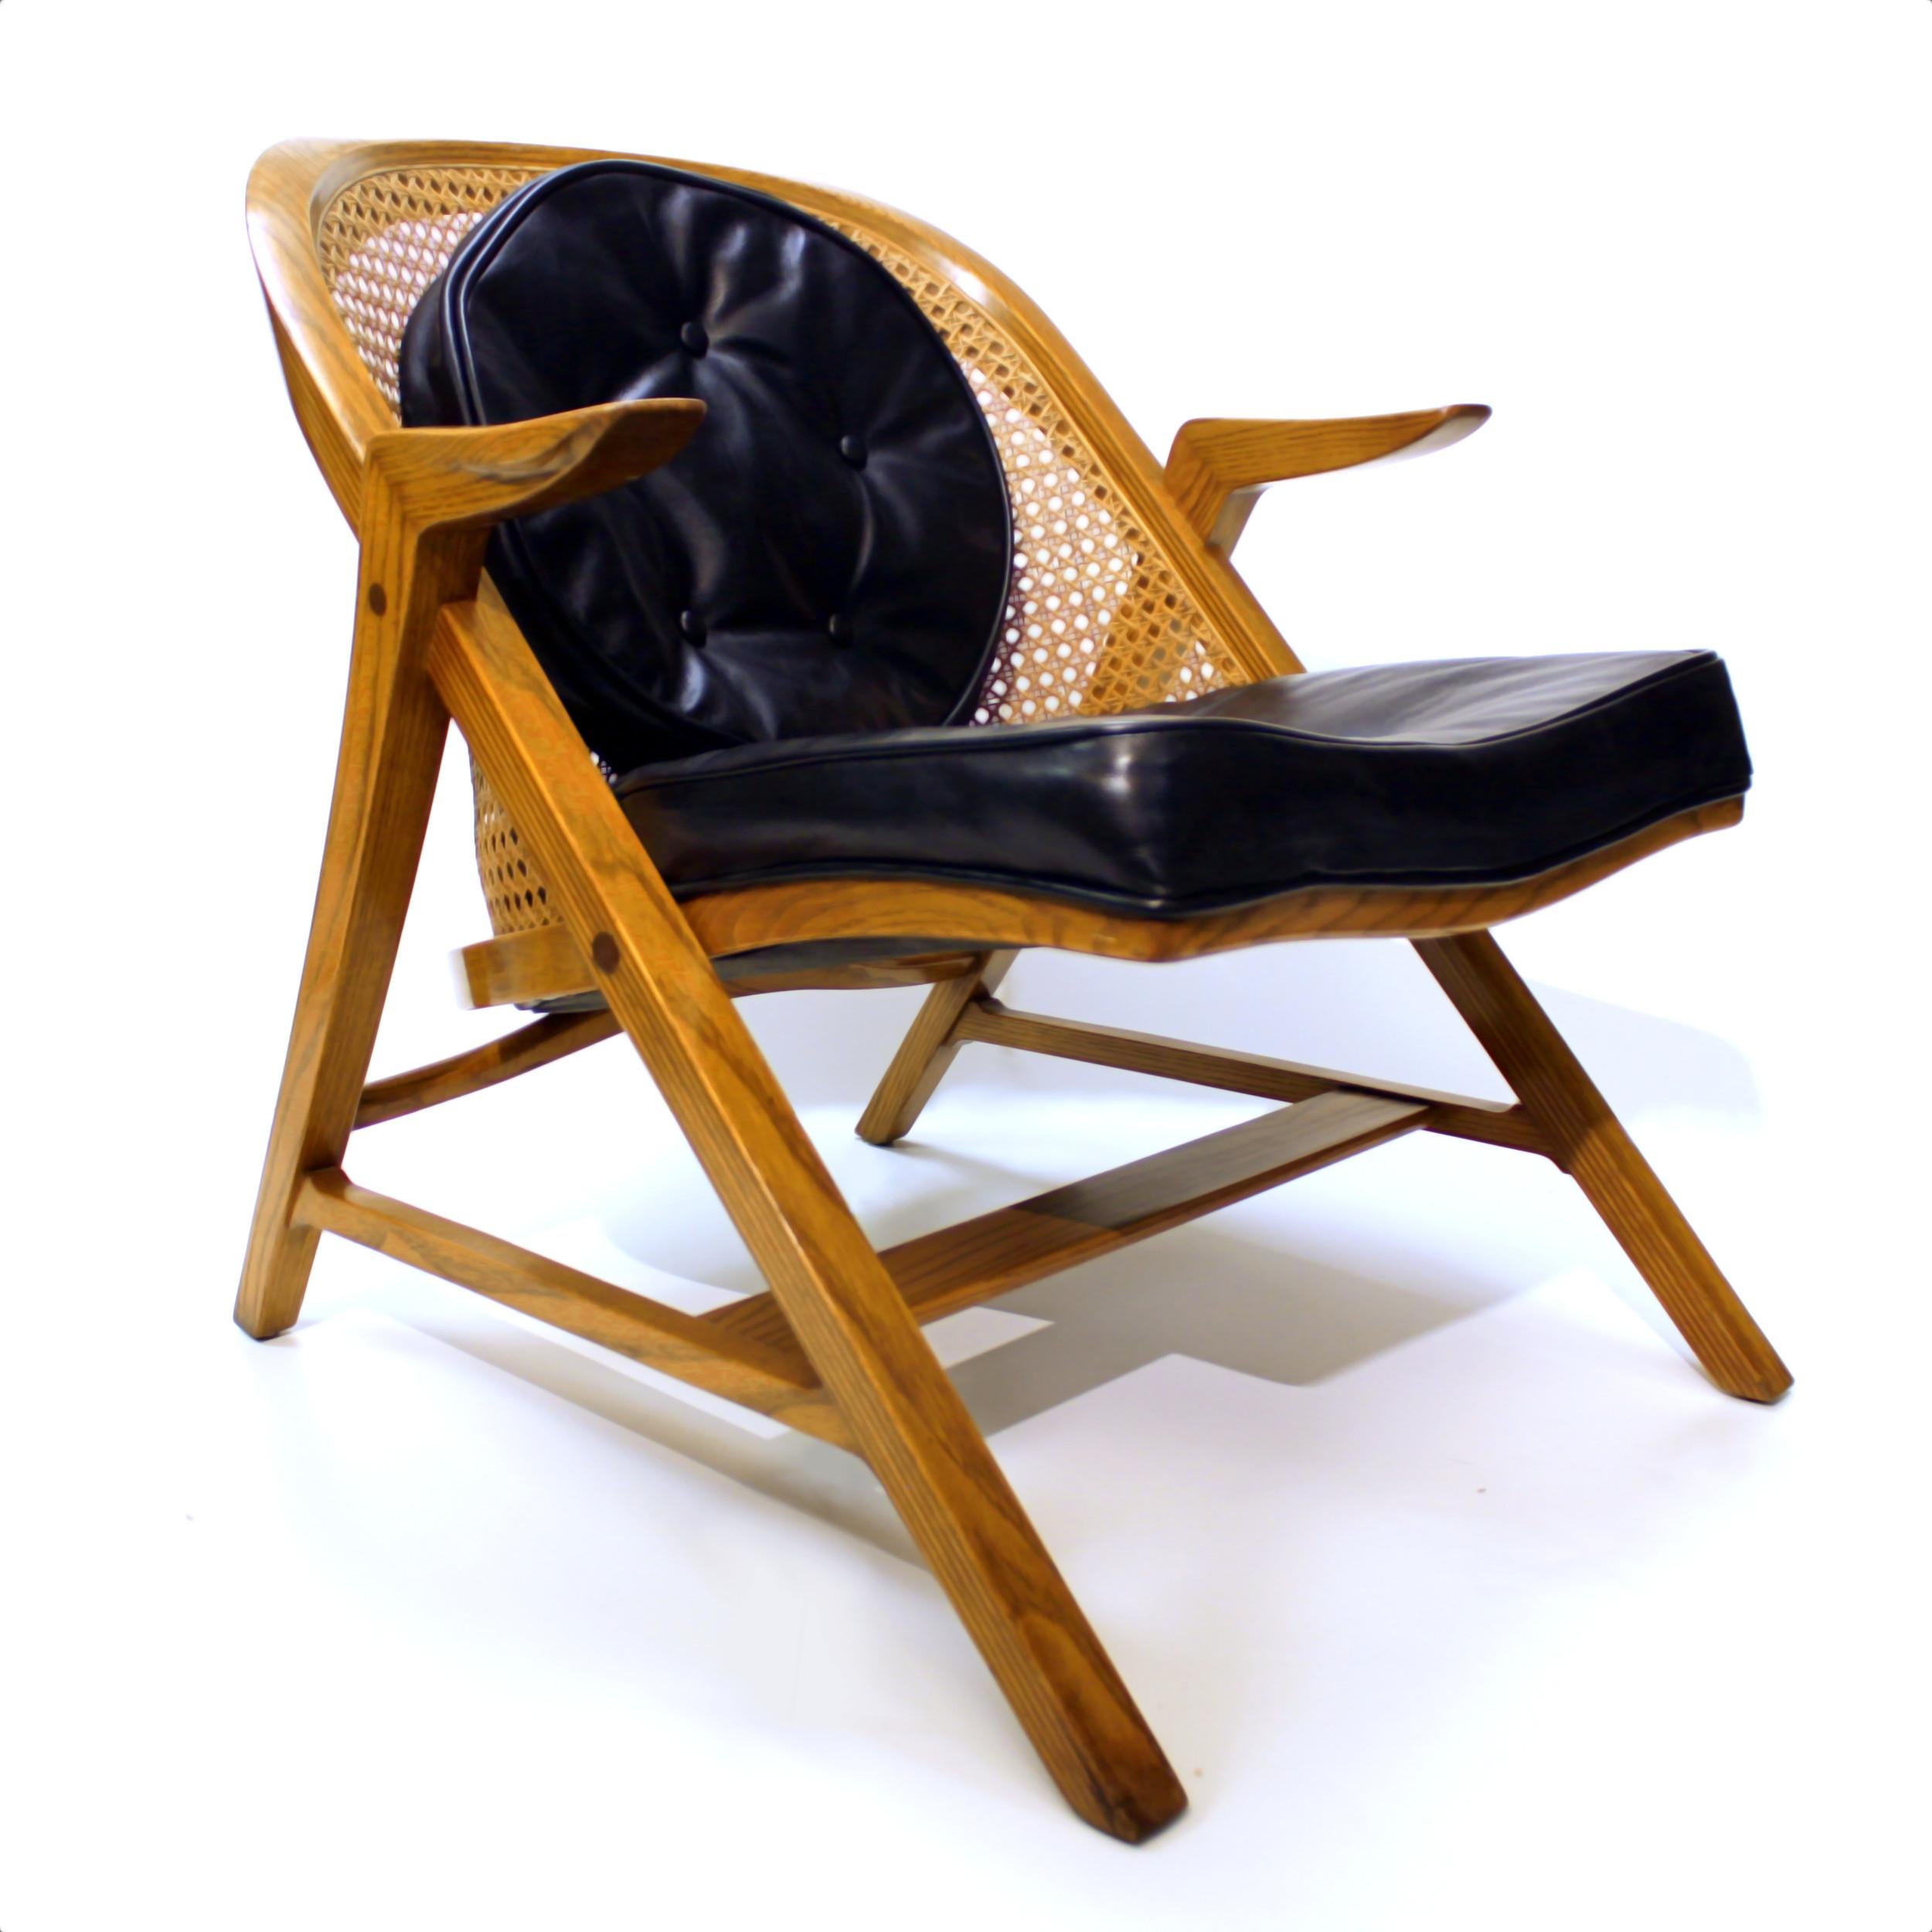 Wonderful 5700-A lounge chair designed by the renowned Edward Wormley for the Dunbar Furniture Co. This rare chair features a beautifully sculpted oak frame, cane barrel back, and black tufted leather seat and pillow. An exceptional example of an